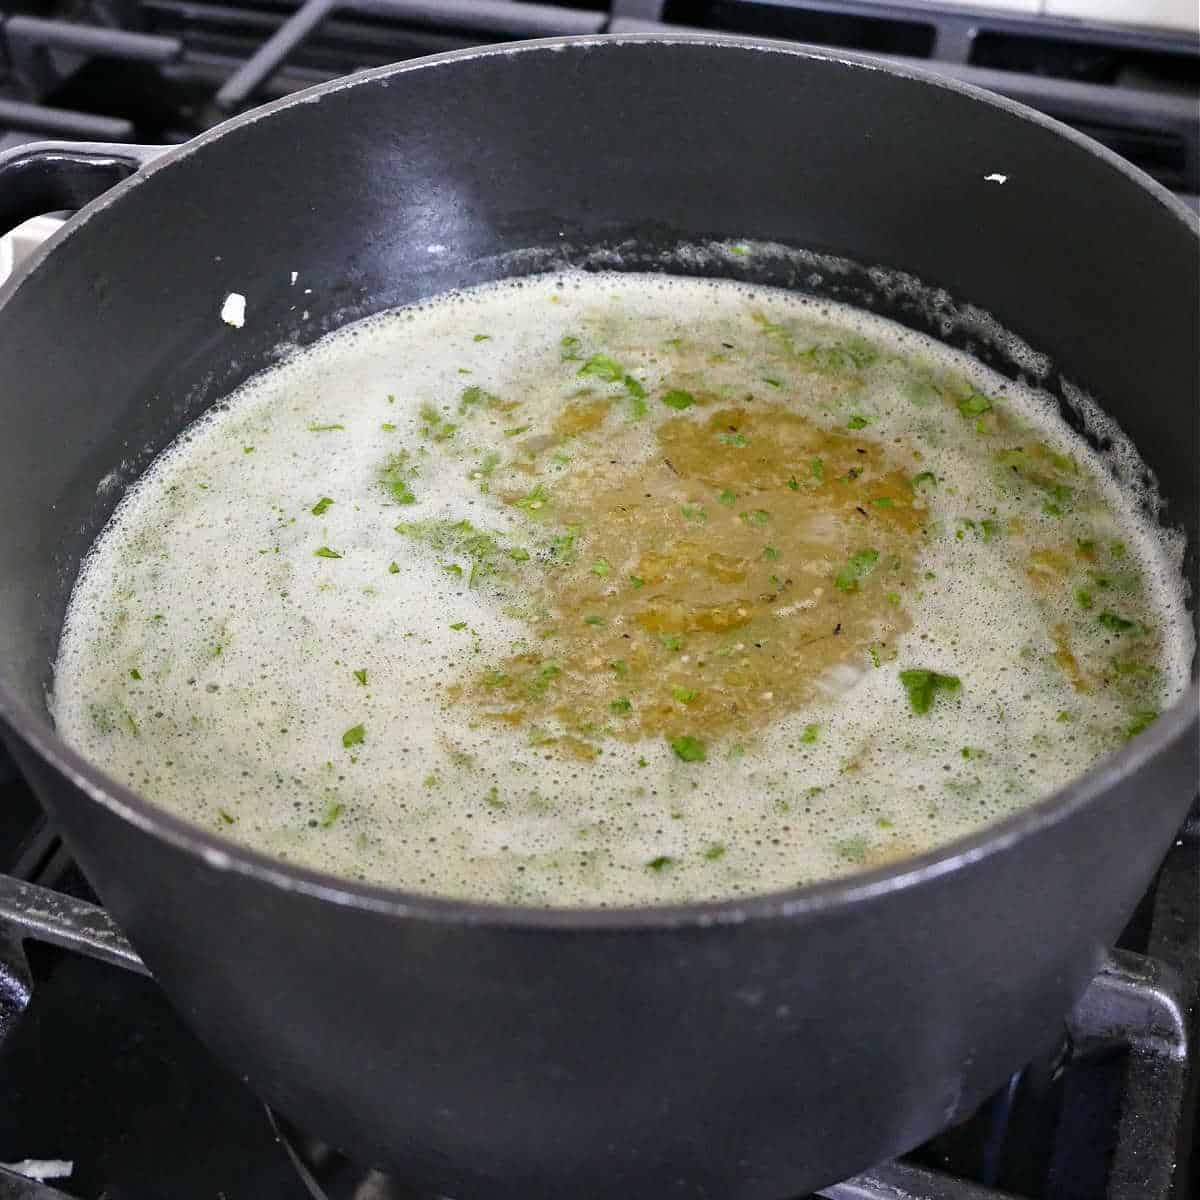 blended tomatillo and pepper mixture added to a soup pot on a stove